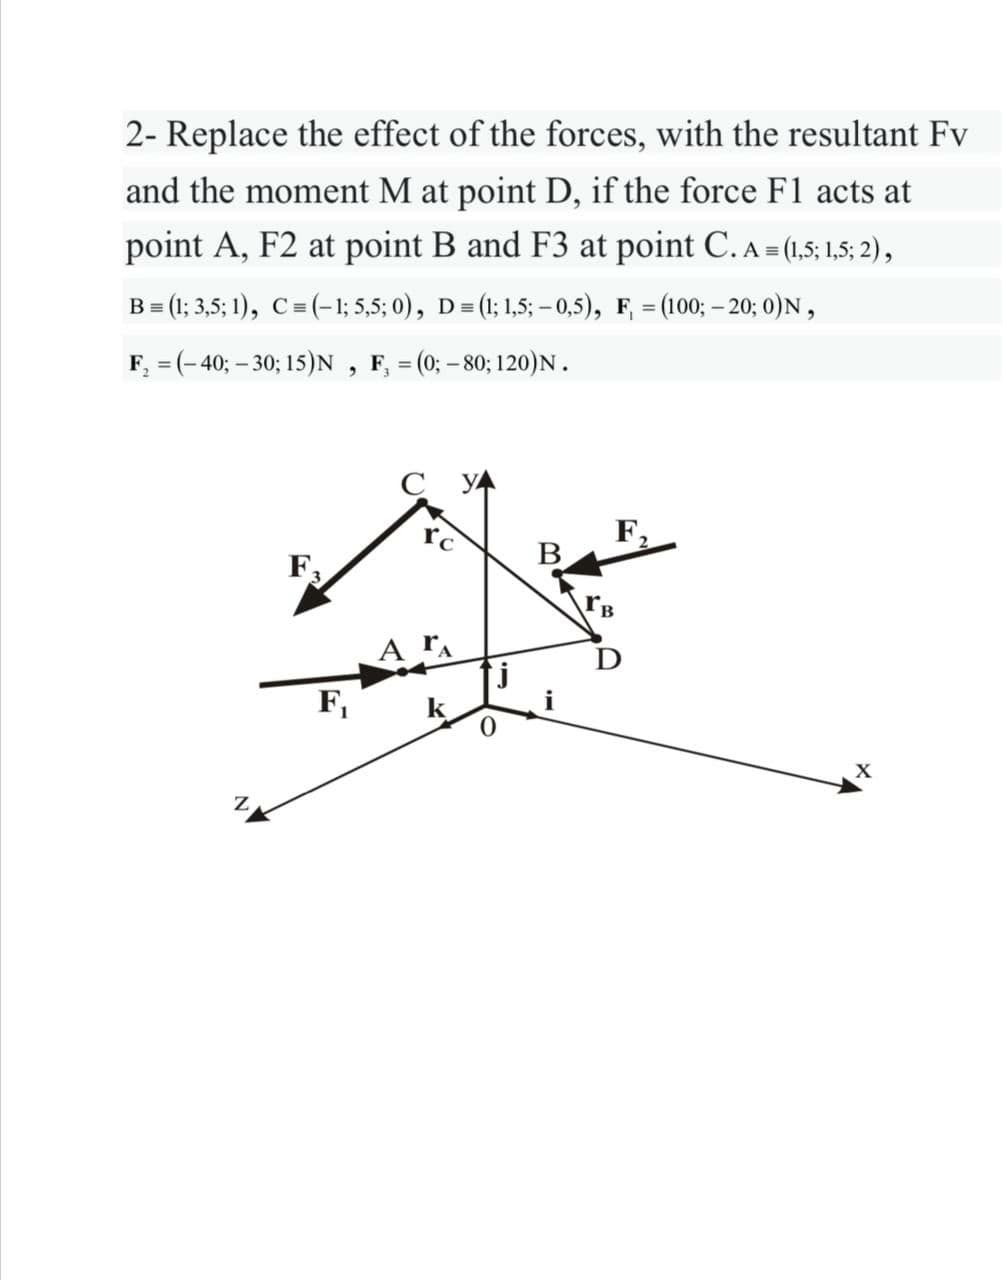 2- Replace the effect of the forces, with the resultant Fv
and the moment M at point D, if the force F1 acts at
point A, F2 at point B and F3 at point C. A (15: 1,5; 2),
B = (1; 3,5; 1), C= (-1; 5,5; 0), D= (1; 1,5; – 0,5), F, = (100; – 20; 0)N,
F, = (-40; - 30; 15)N , F, = (0; - 80; 120)N.
F,
B
A rA
F,
